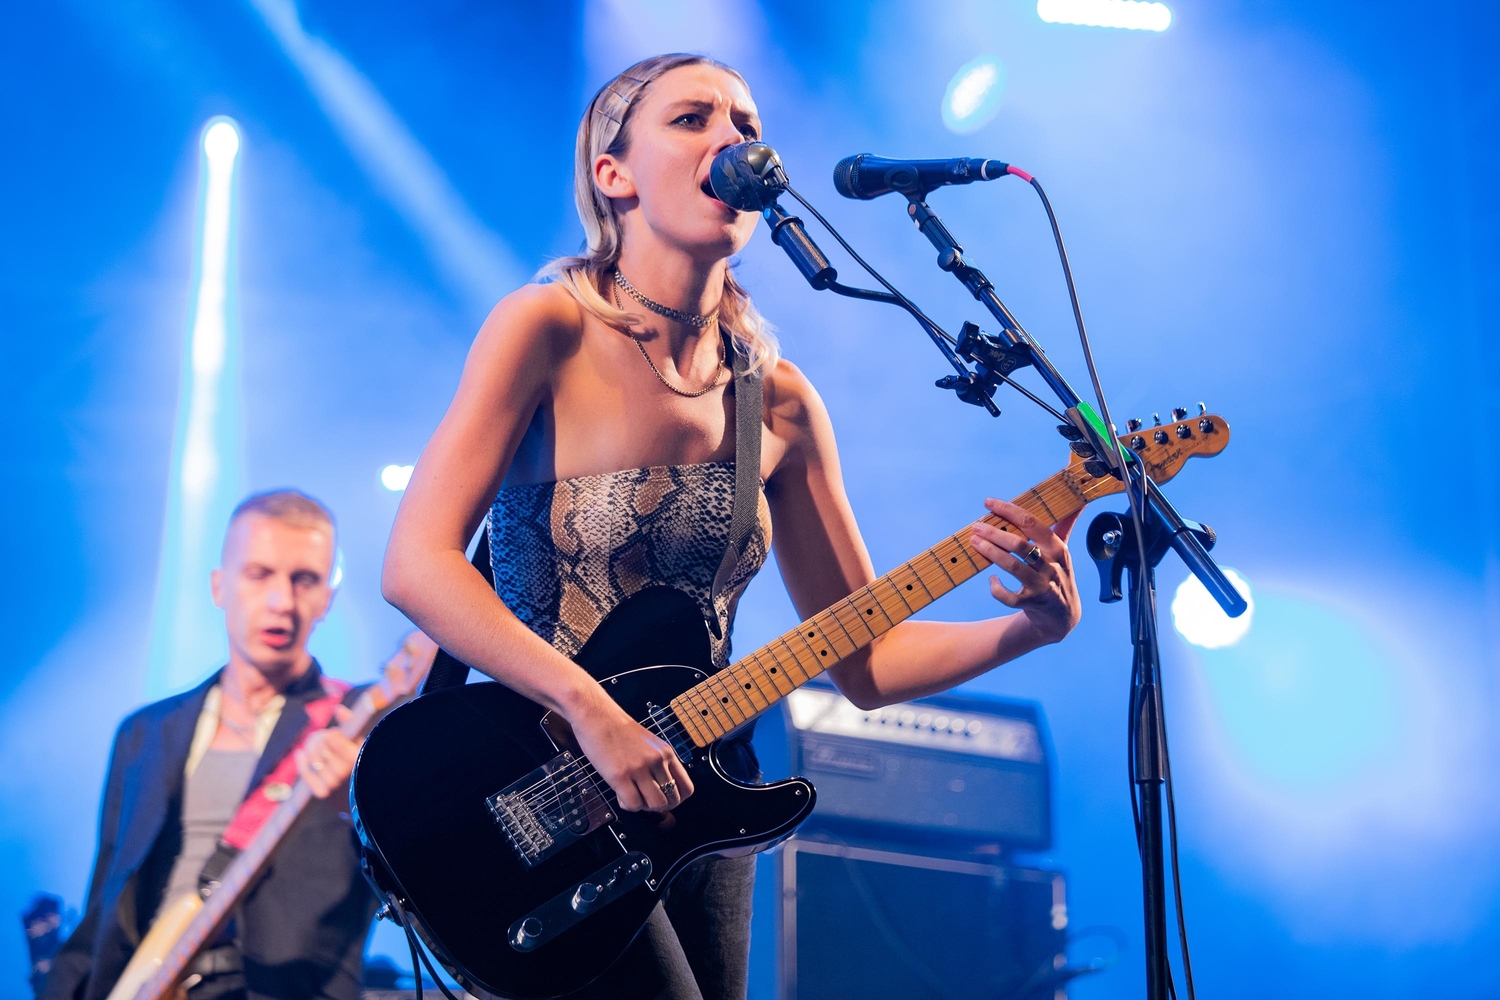 Wolf Alice’s Ellie Rowsell discusses the fight to save grassroots venues